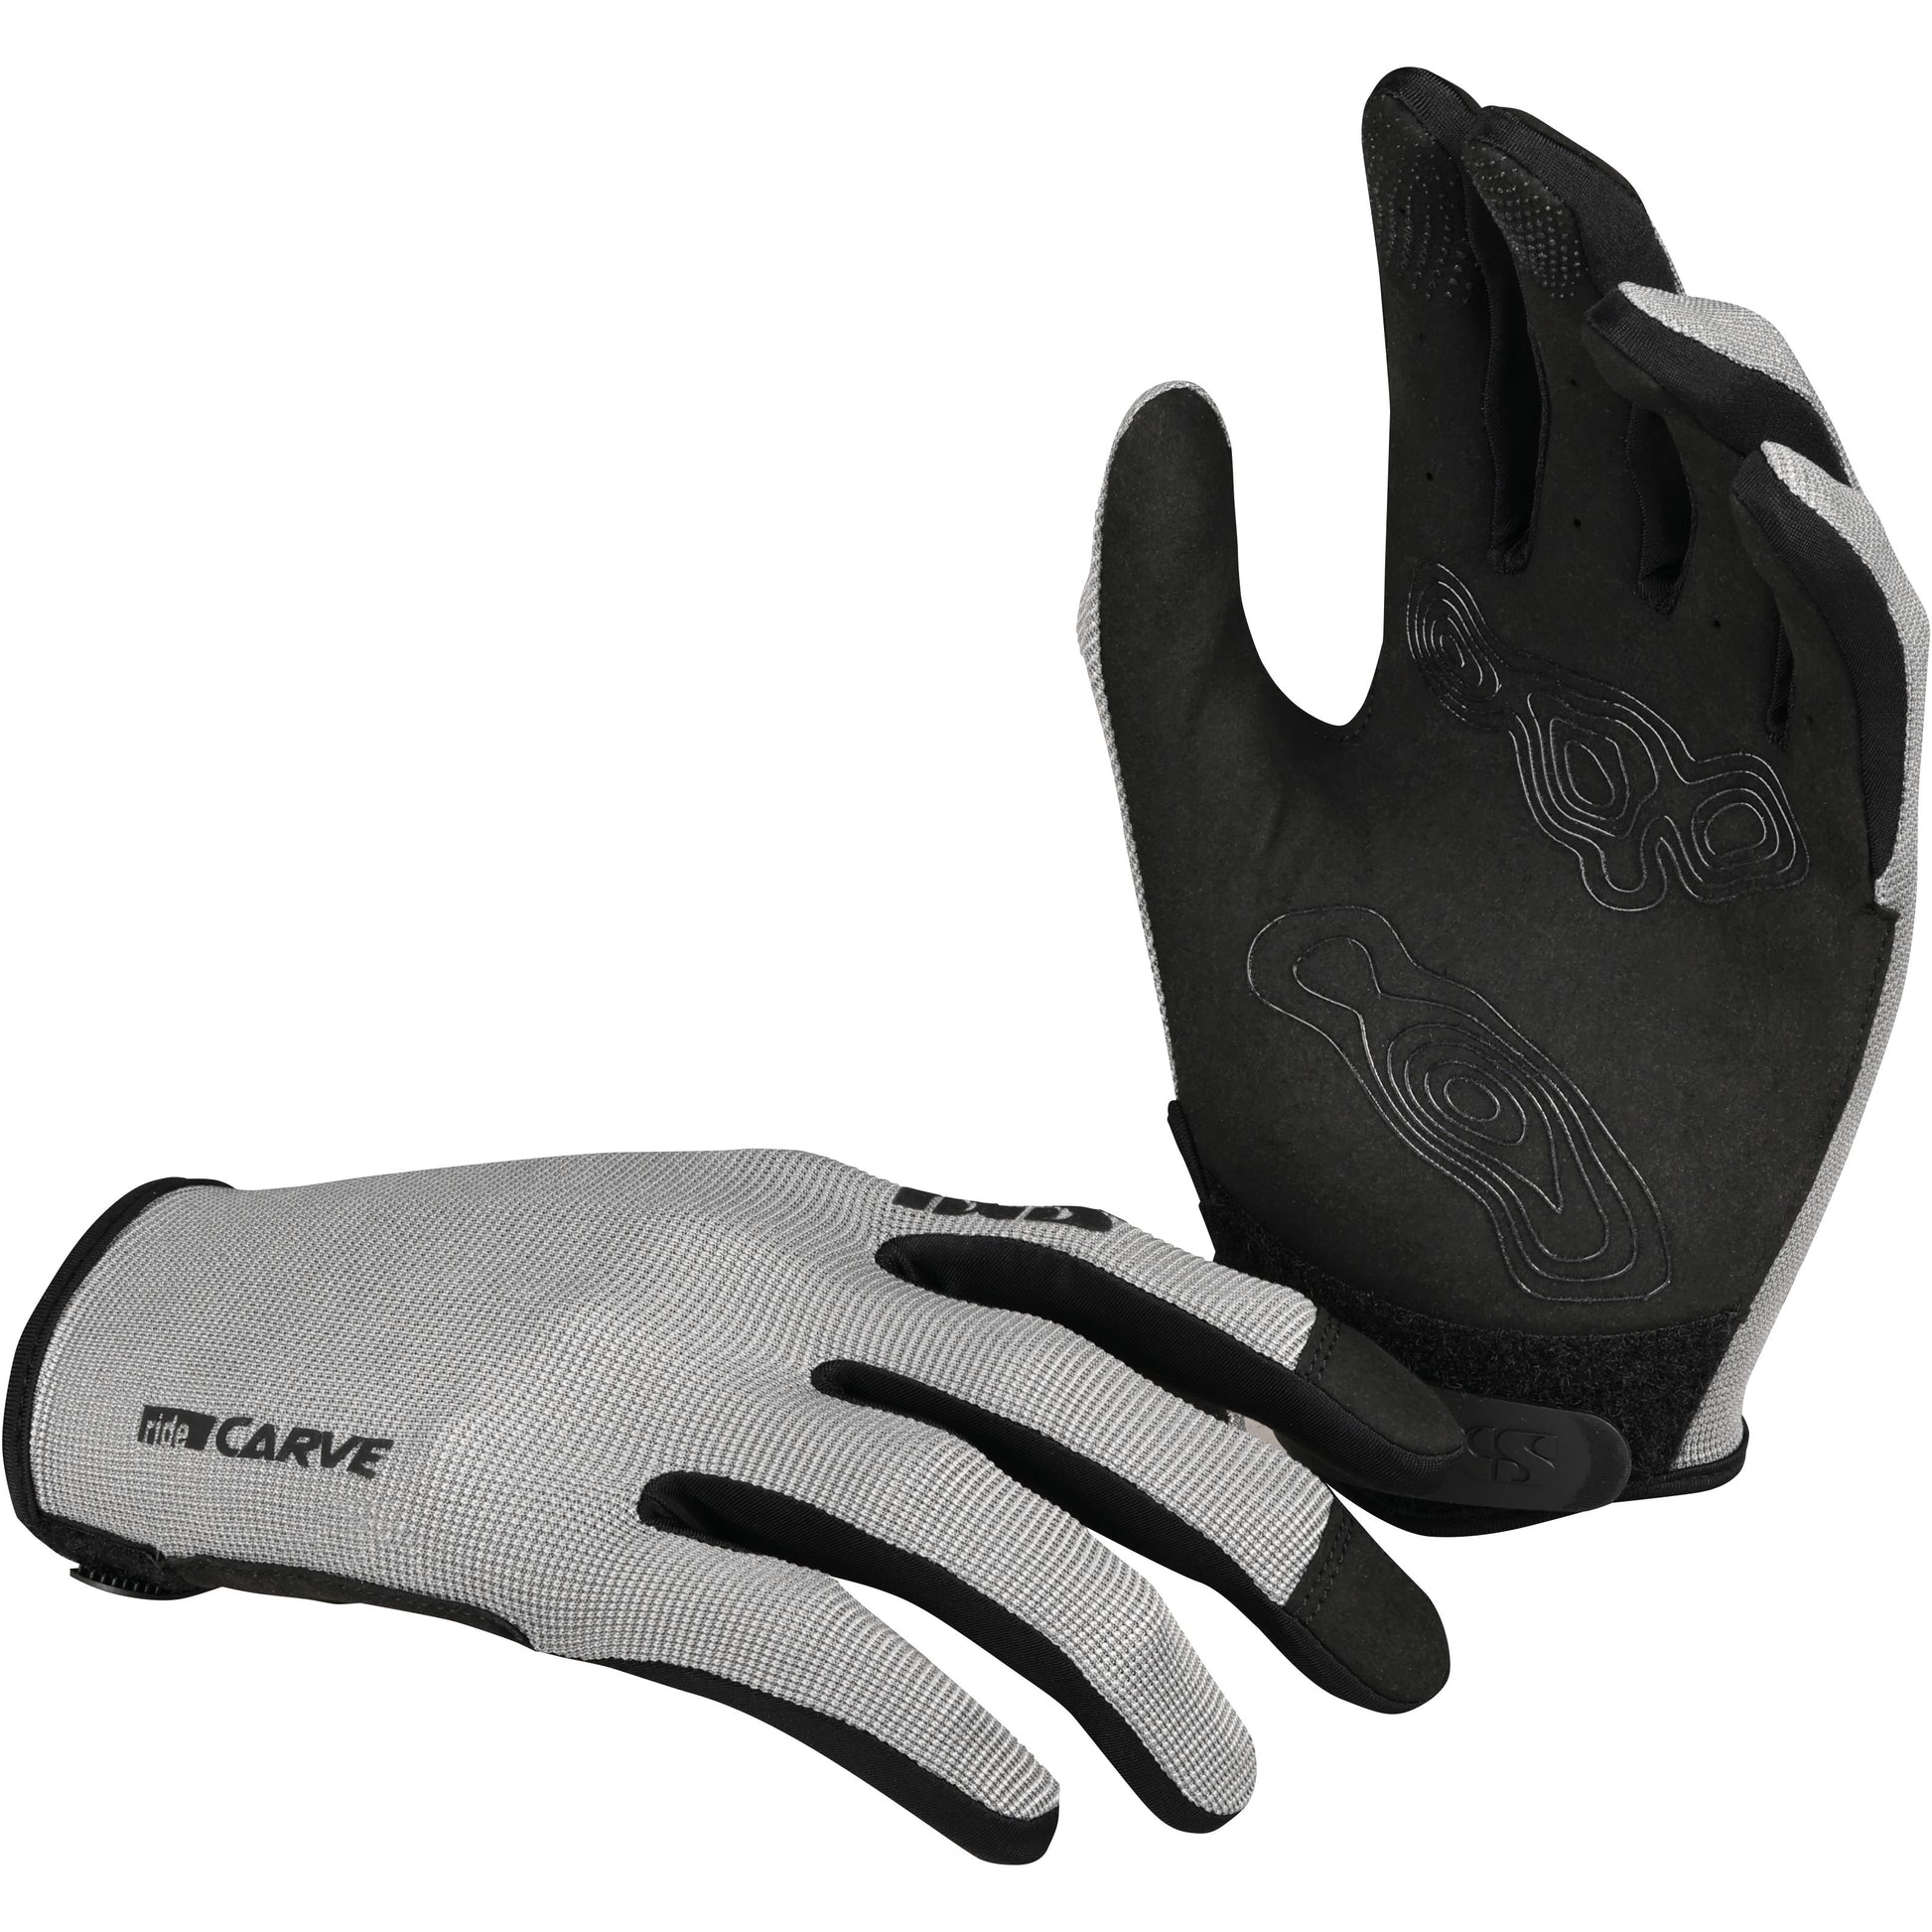 iXS iXS Carve Digger gloves - Gloves - Bicycle Warehouse